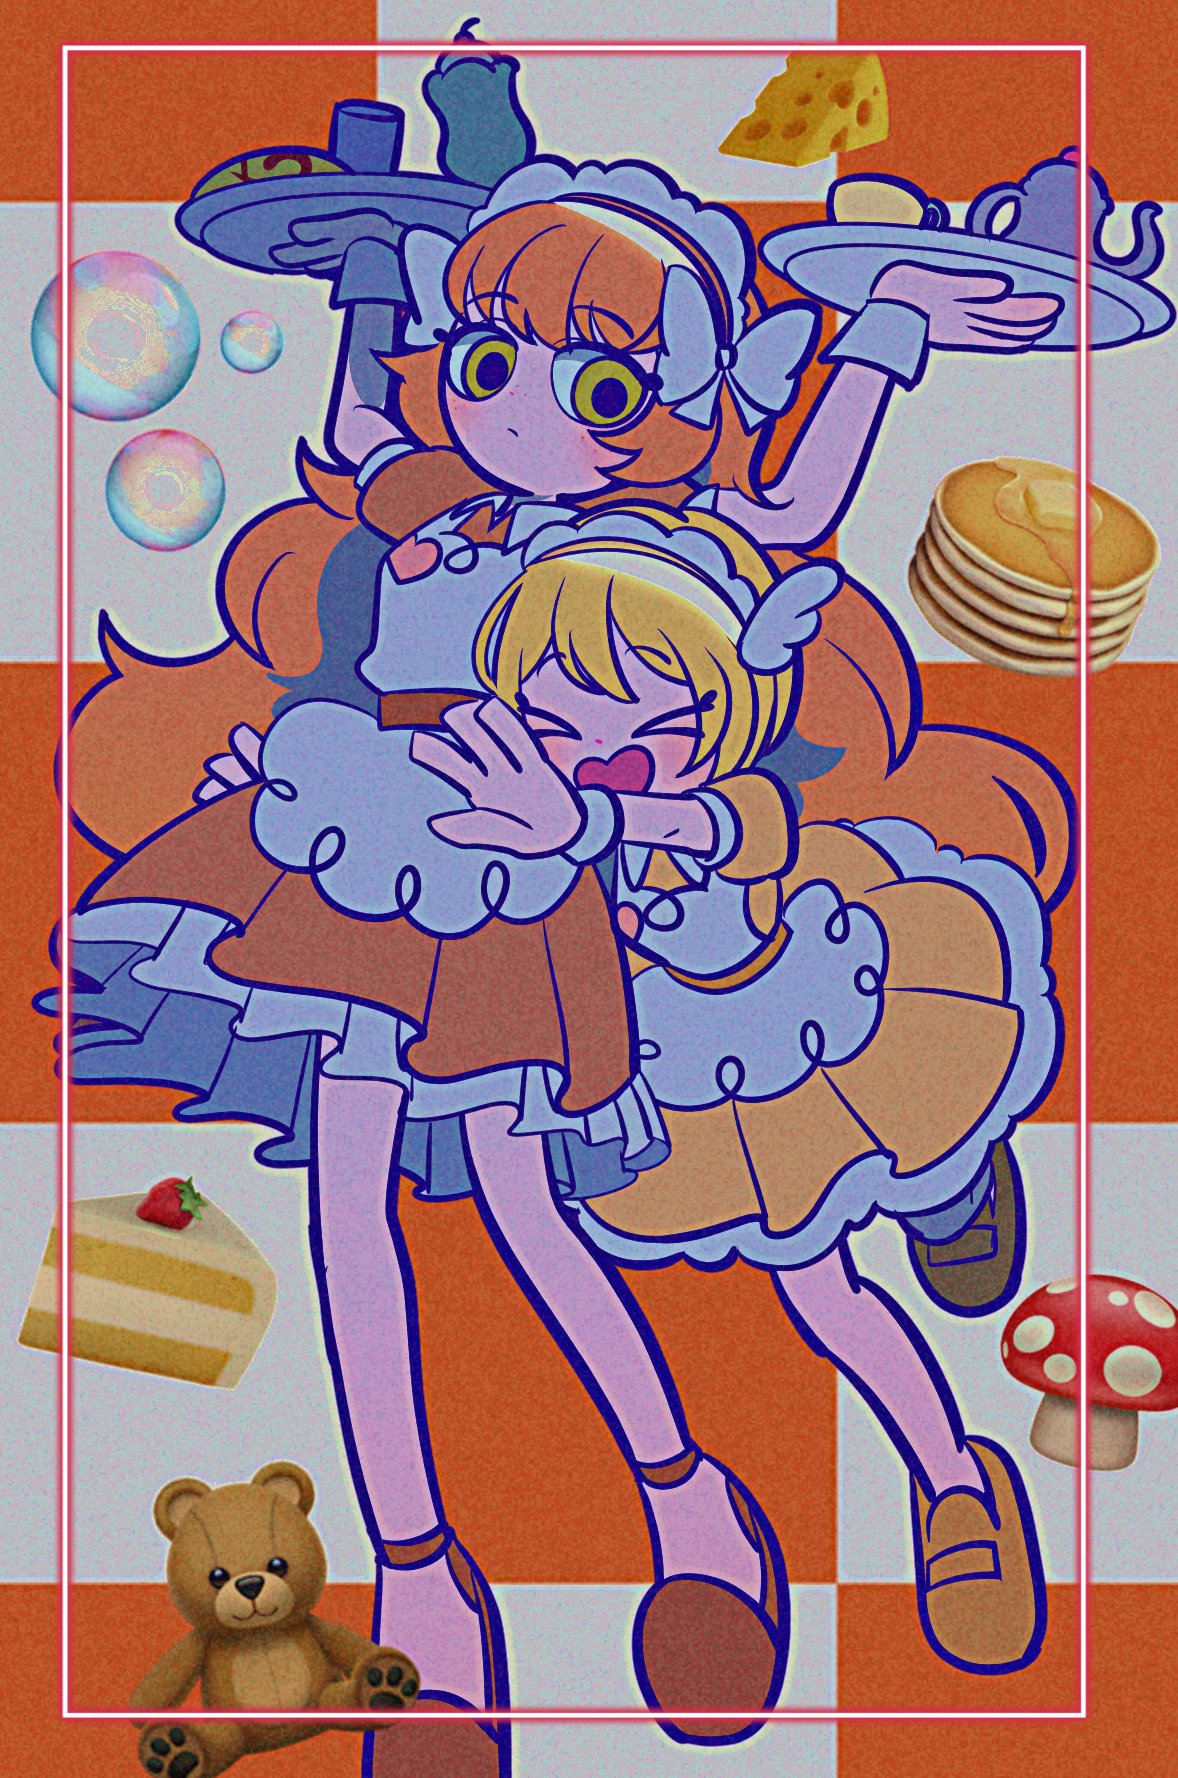 2girls apron blonde_hair bubble cake checkered_background cheese closed_eyes color8838 don_quixote_(limbus_company) food highres holding holding_tray ice_cream ishmael_(limbus_company) limbus_company long_hair multiple_girls open_mouth orange_hair pancake project_moon stuffed_animal stuffed_toy teddy_bear tray tripping very_long_hair waitress